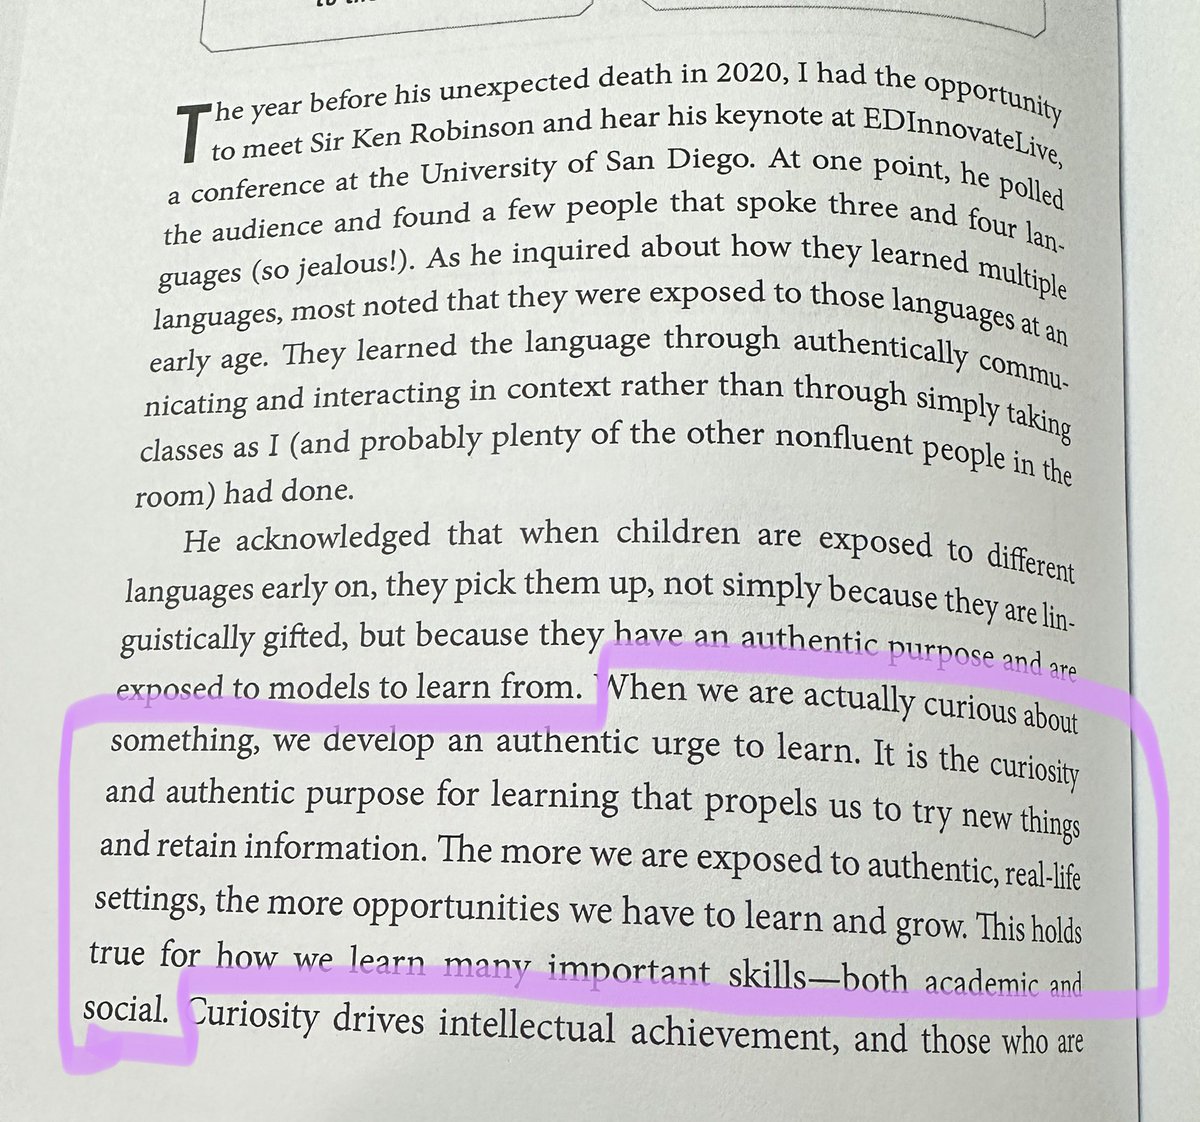 I’ve been learning Spanish as an adult for the last 2 yrs. I thought it would be easy because I was raised bilingual (English & Haitian-Creole) but it’s quite difficult. #EvolvingEducation Ch.9 points out the importance of curiosity & purpose in authentic learning. #MUSOE